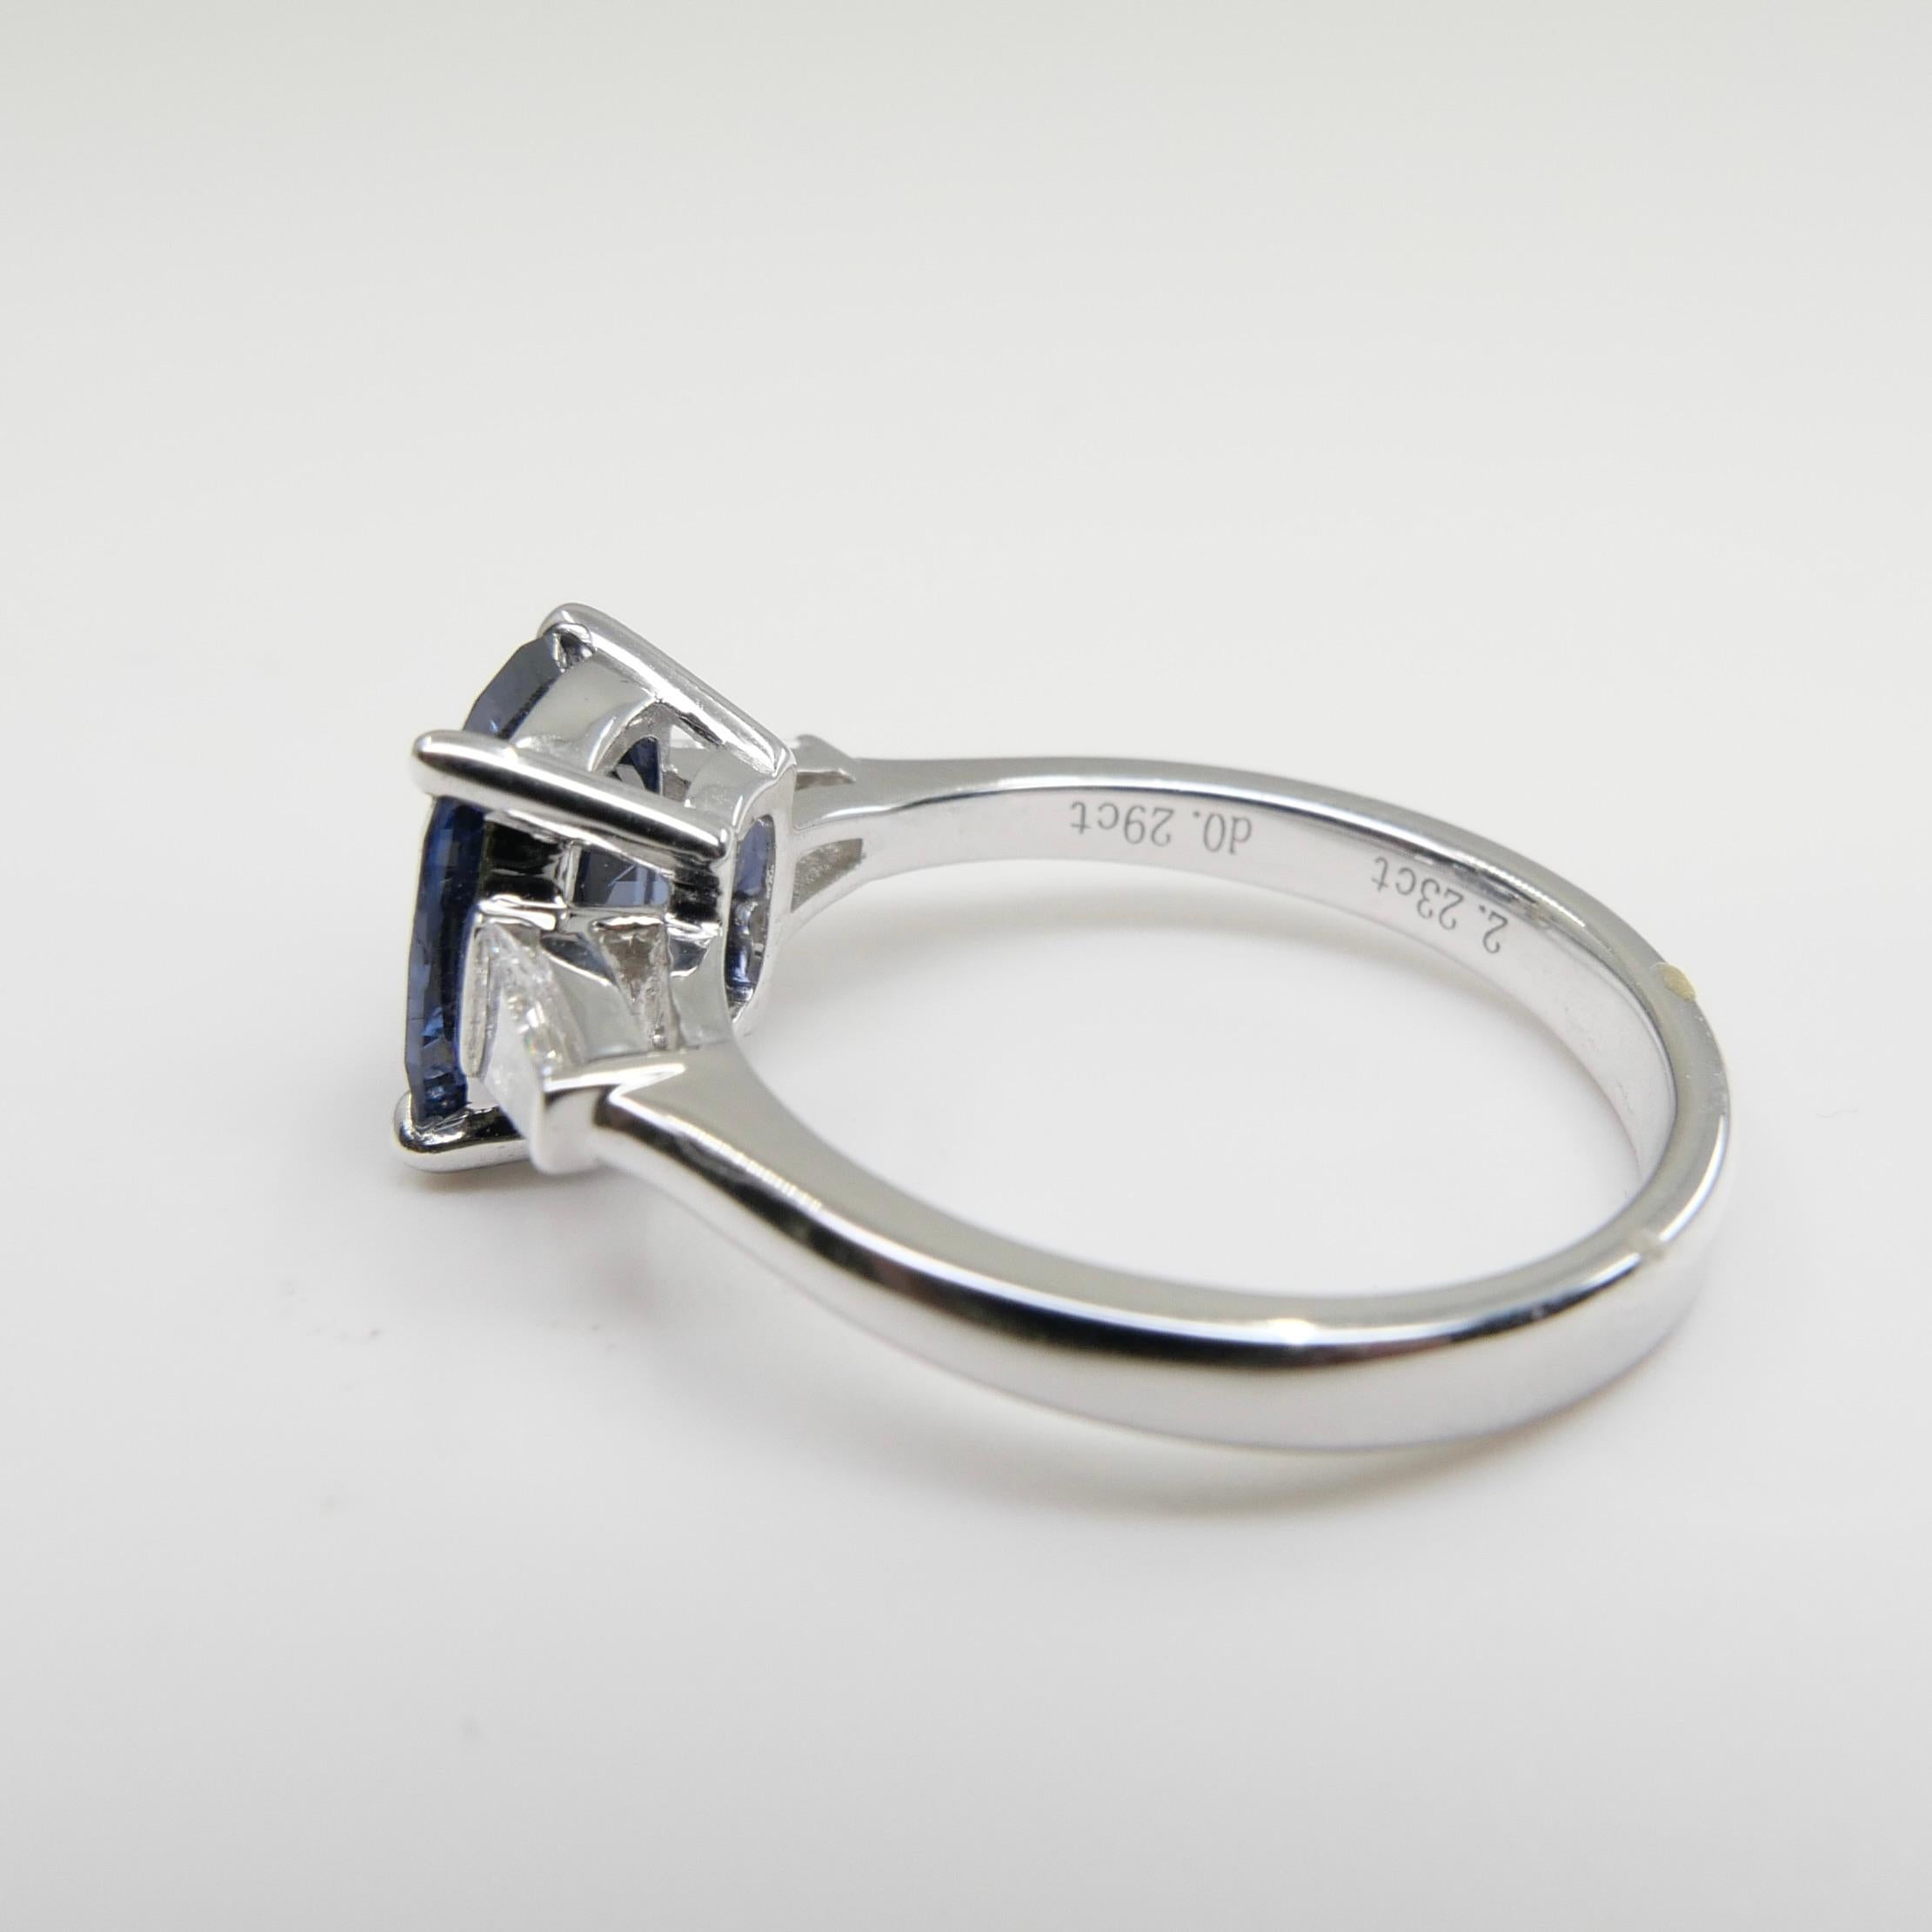 GRS Certified 2.23 Cts Cobalt Spinel & Diamond Cocktail Ring. Collector's Item.  For Sale 9